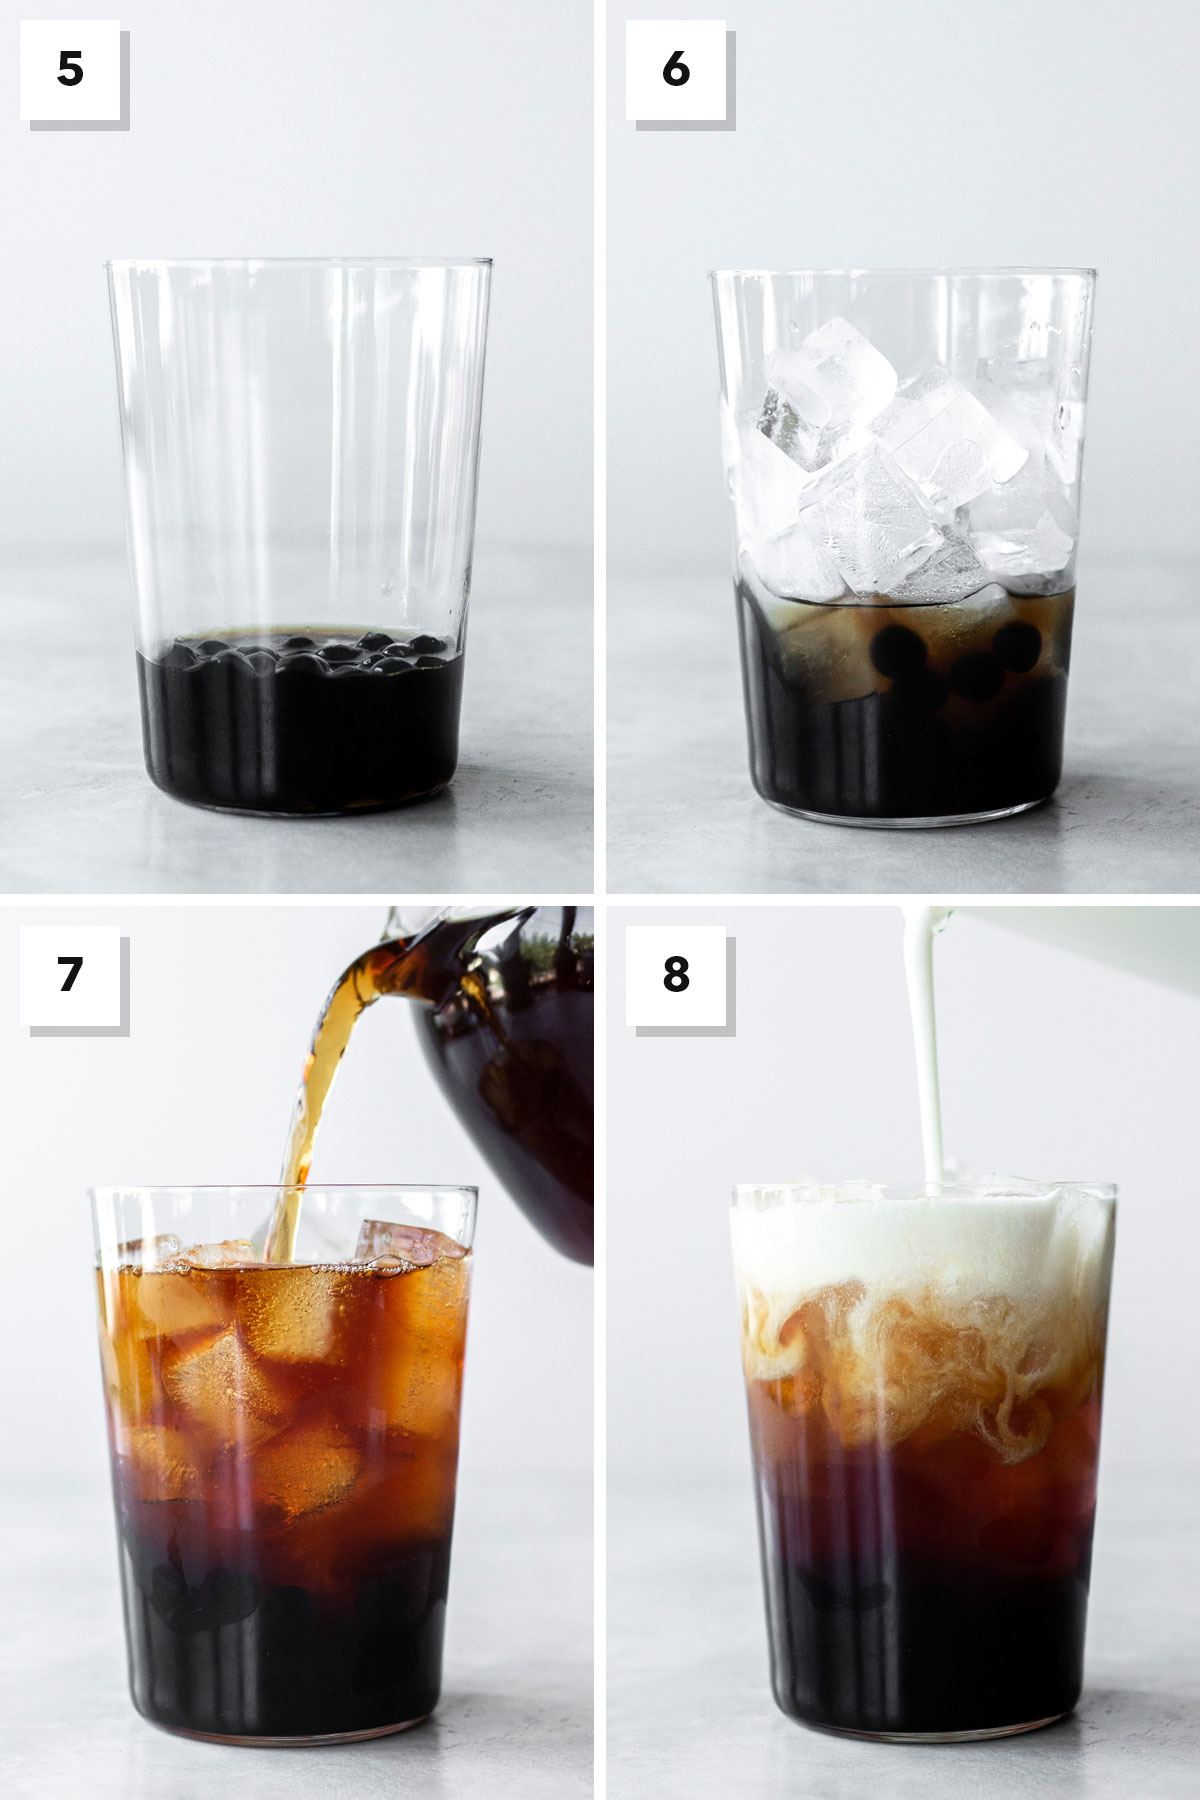 Assembling a bubble tea drink in a glass, shown in 4 photos.